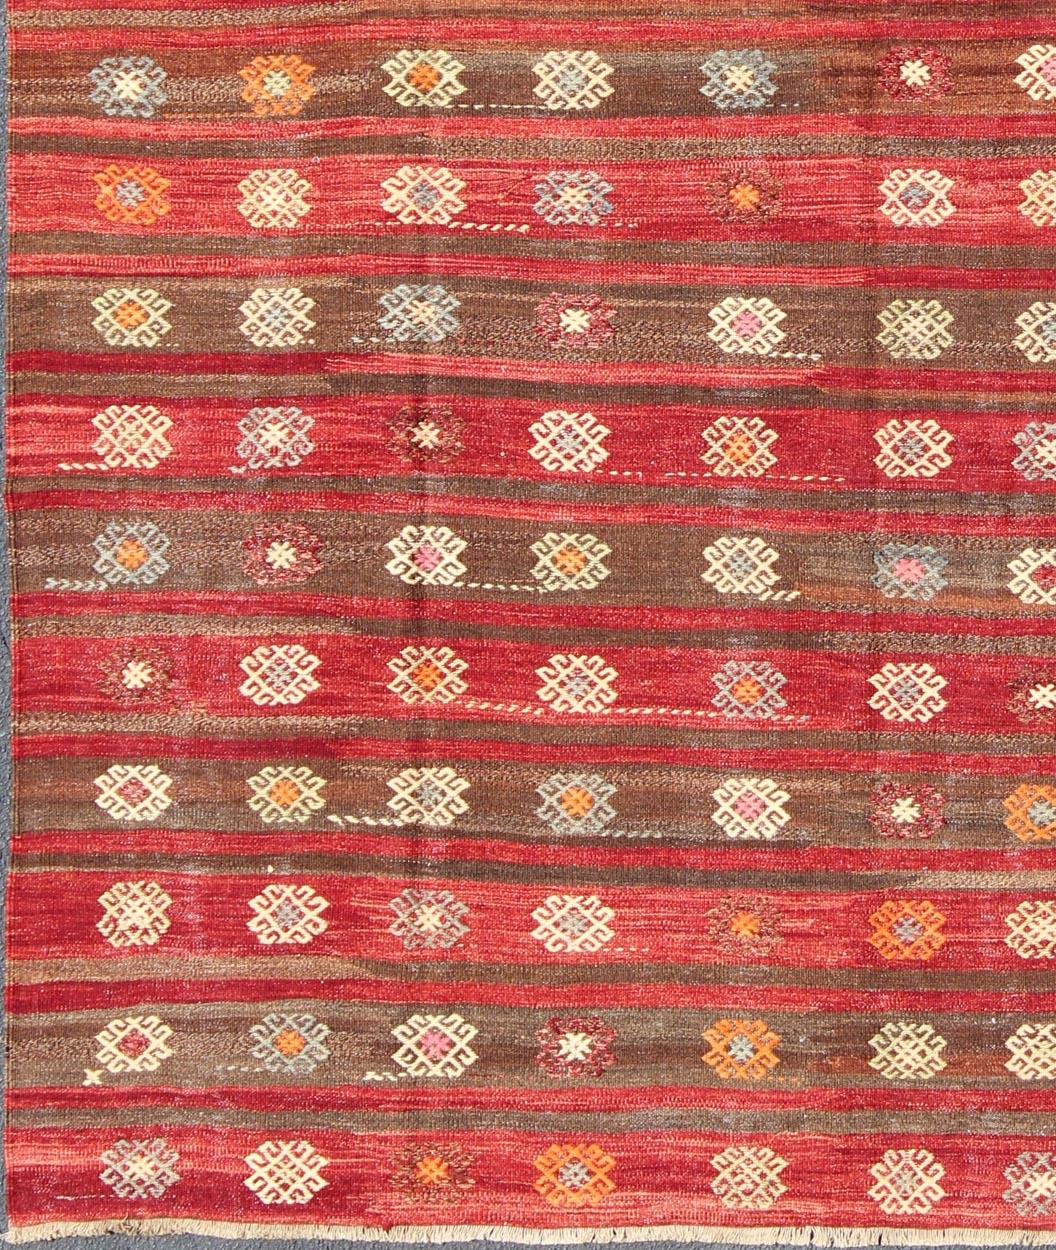 Red and Brown Striped Turkish Hand Woven Kilim Rug with Geometric Shapes In Good Condition For Sale In Atlanta, GA